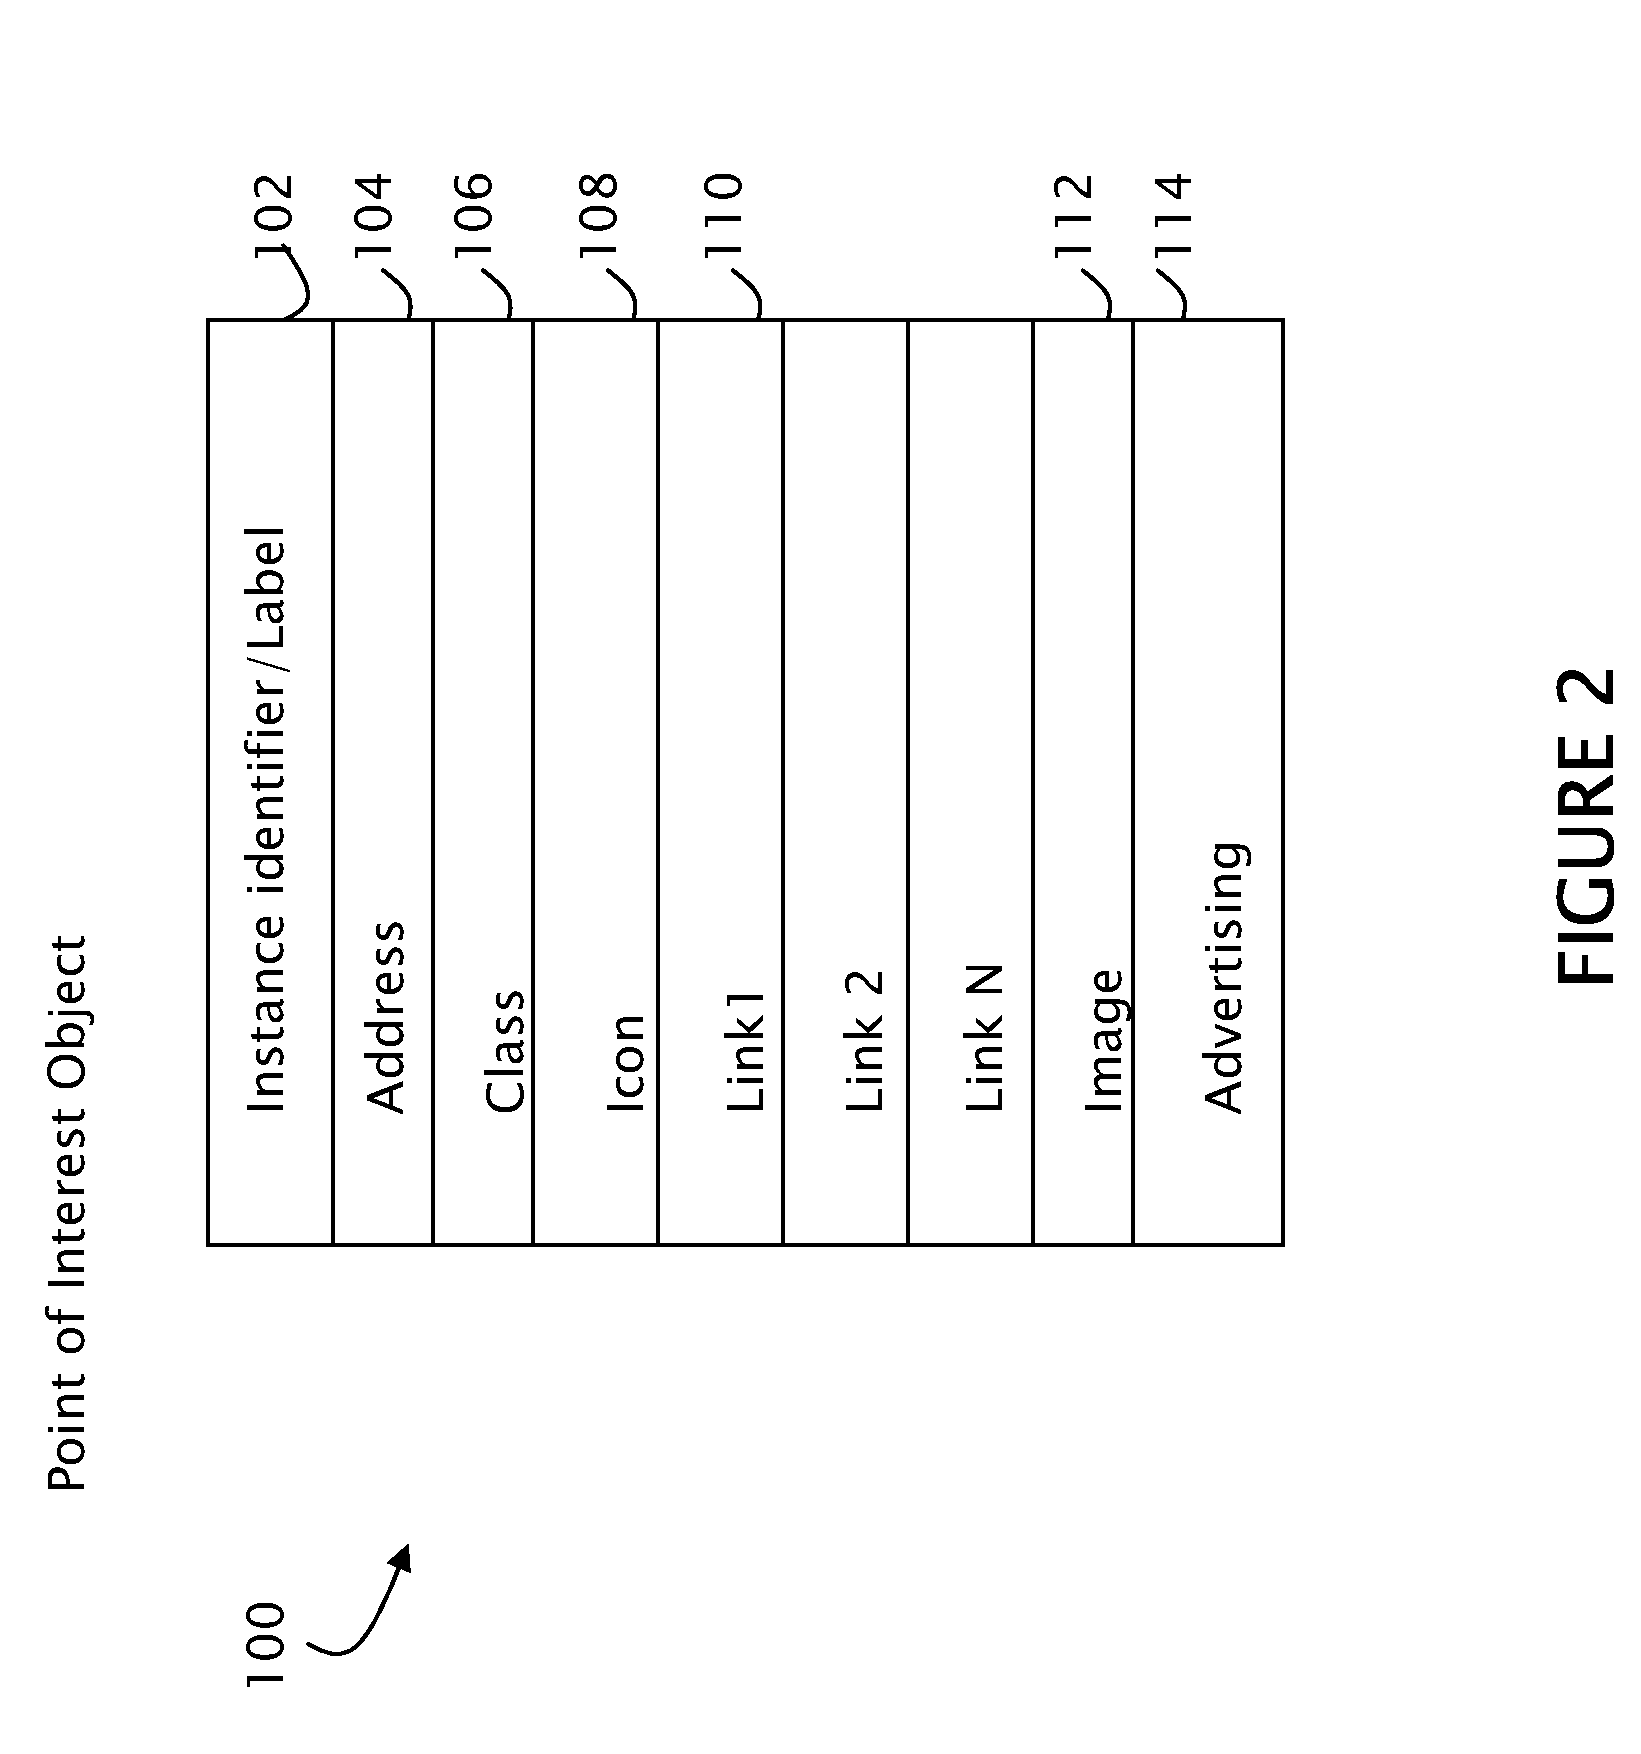 Method and Apparatus for Providing Scroll Buttons